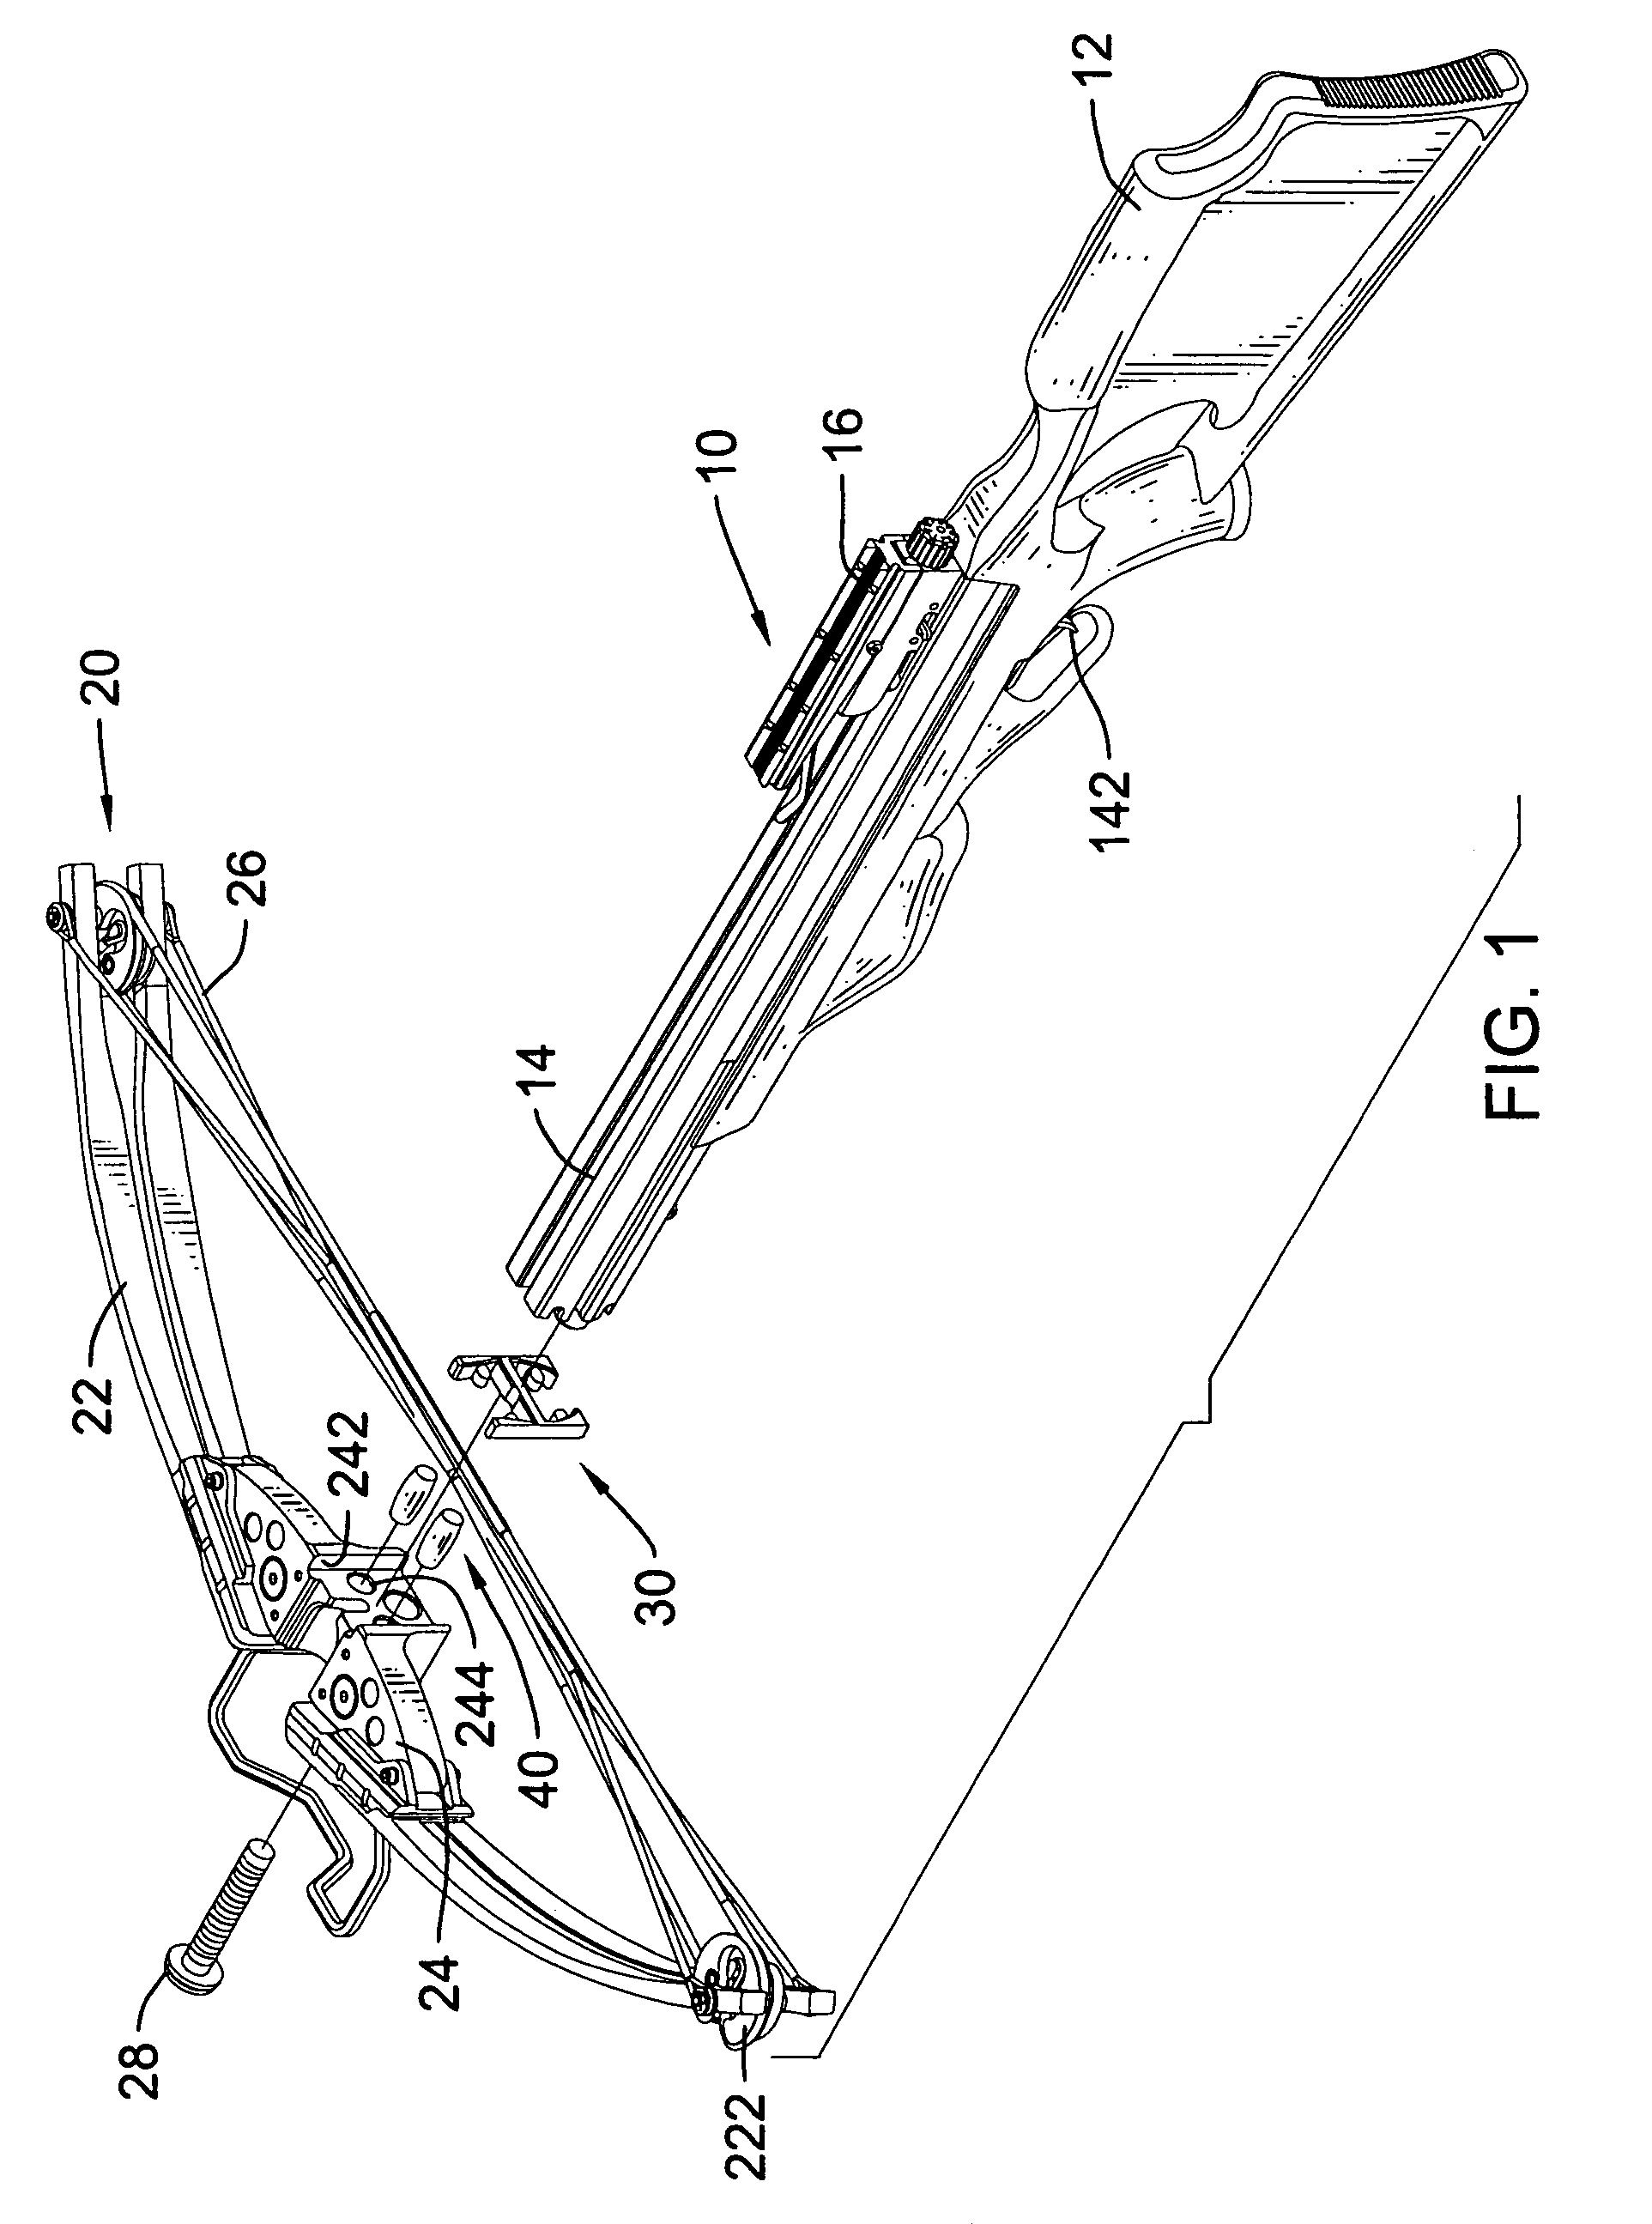 Crossbow with a vibration-damping device